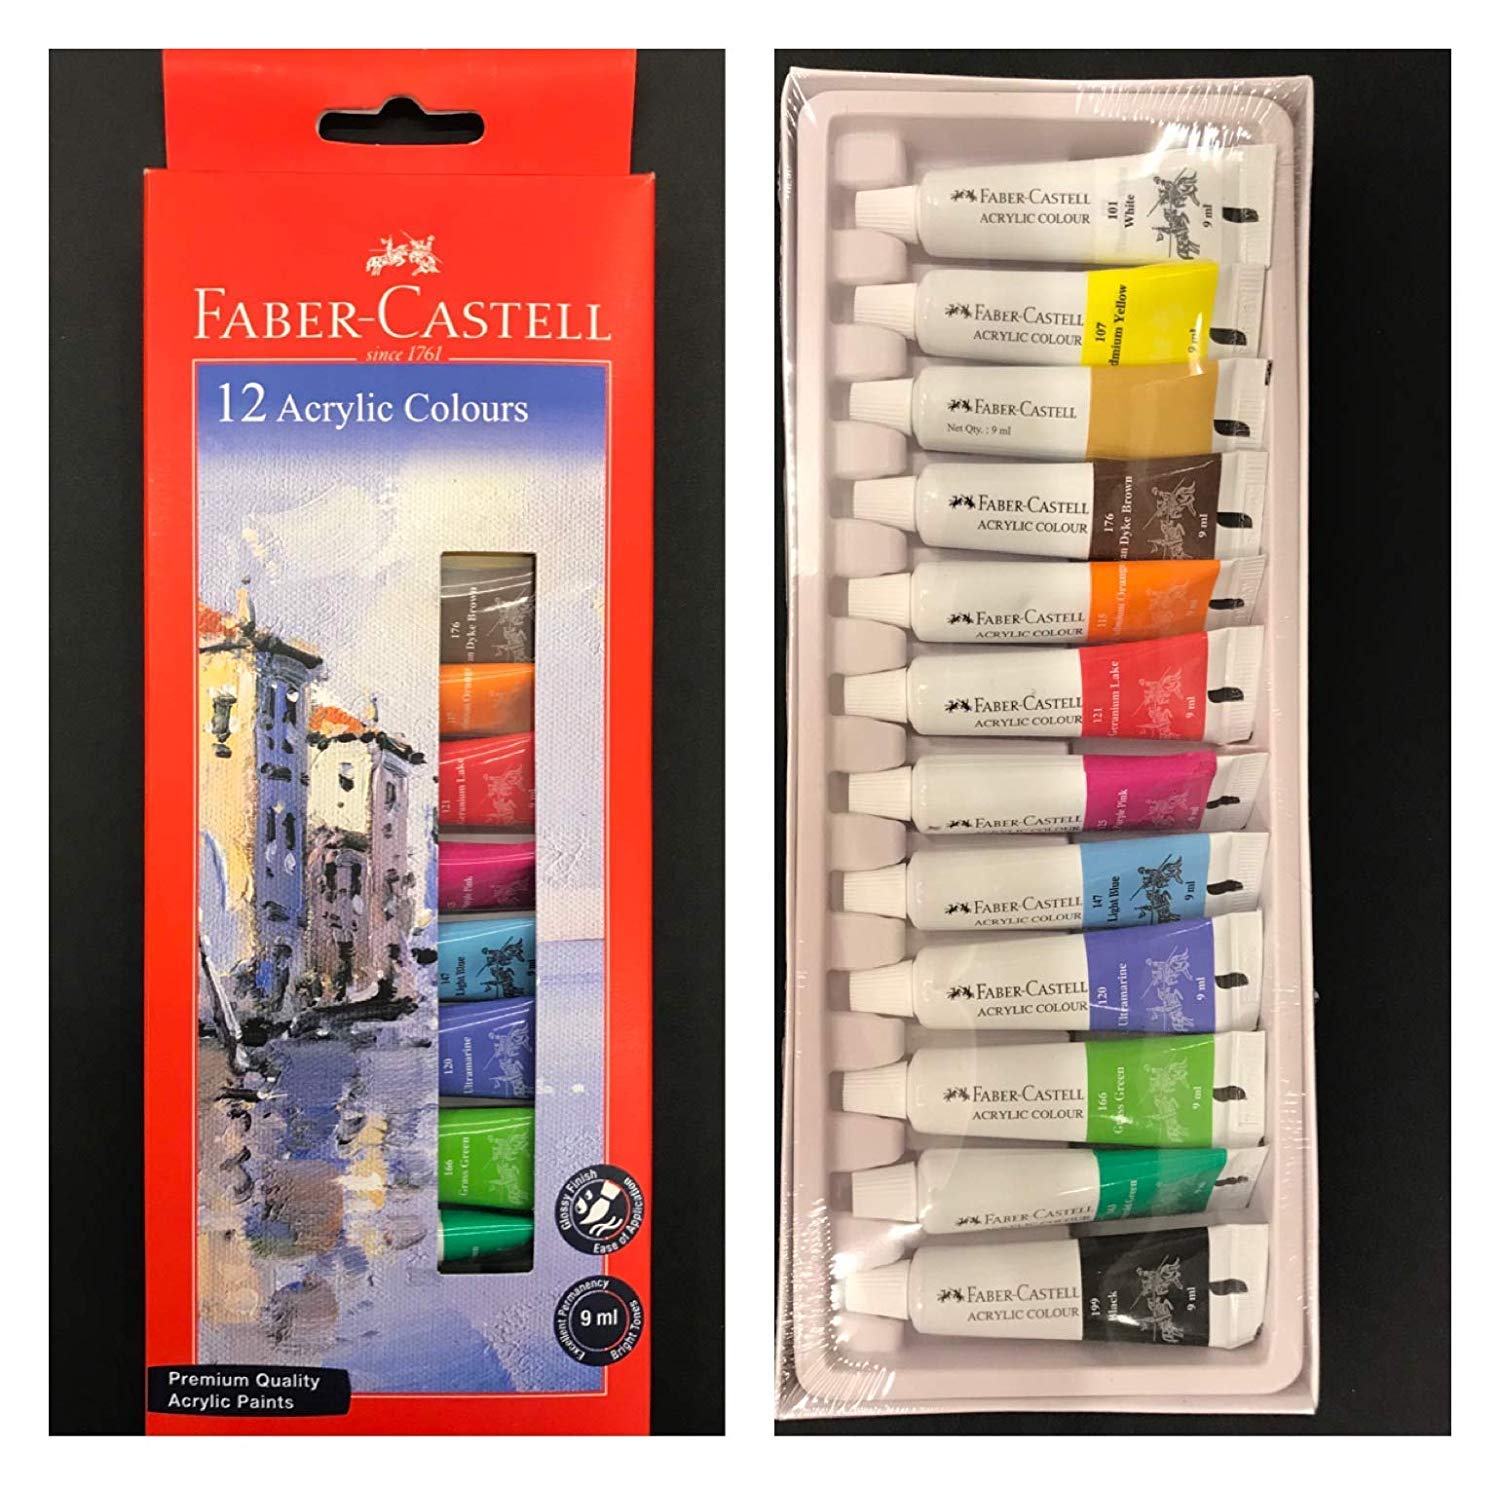 Faber-Castell Student Acrylic Colour Set - Pack of 12